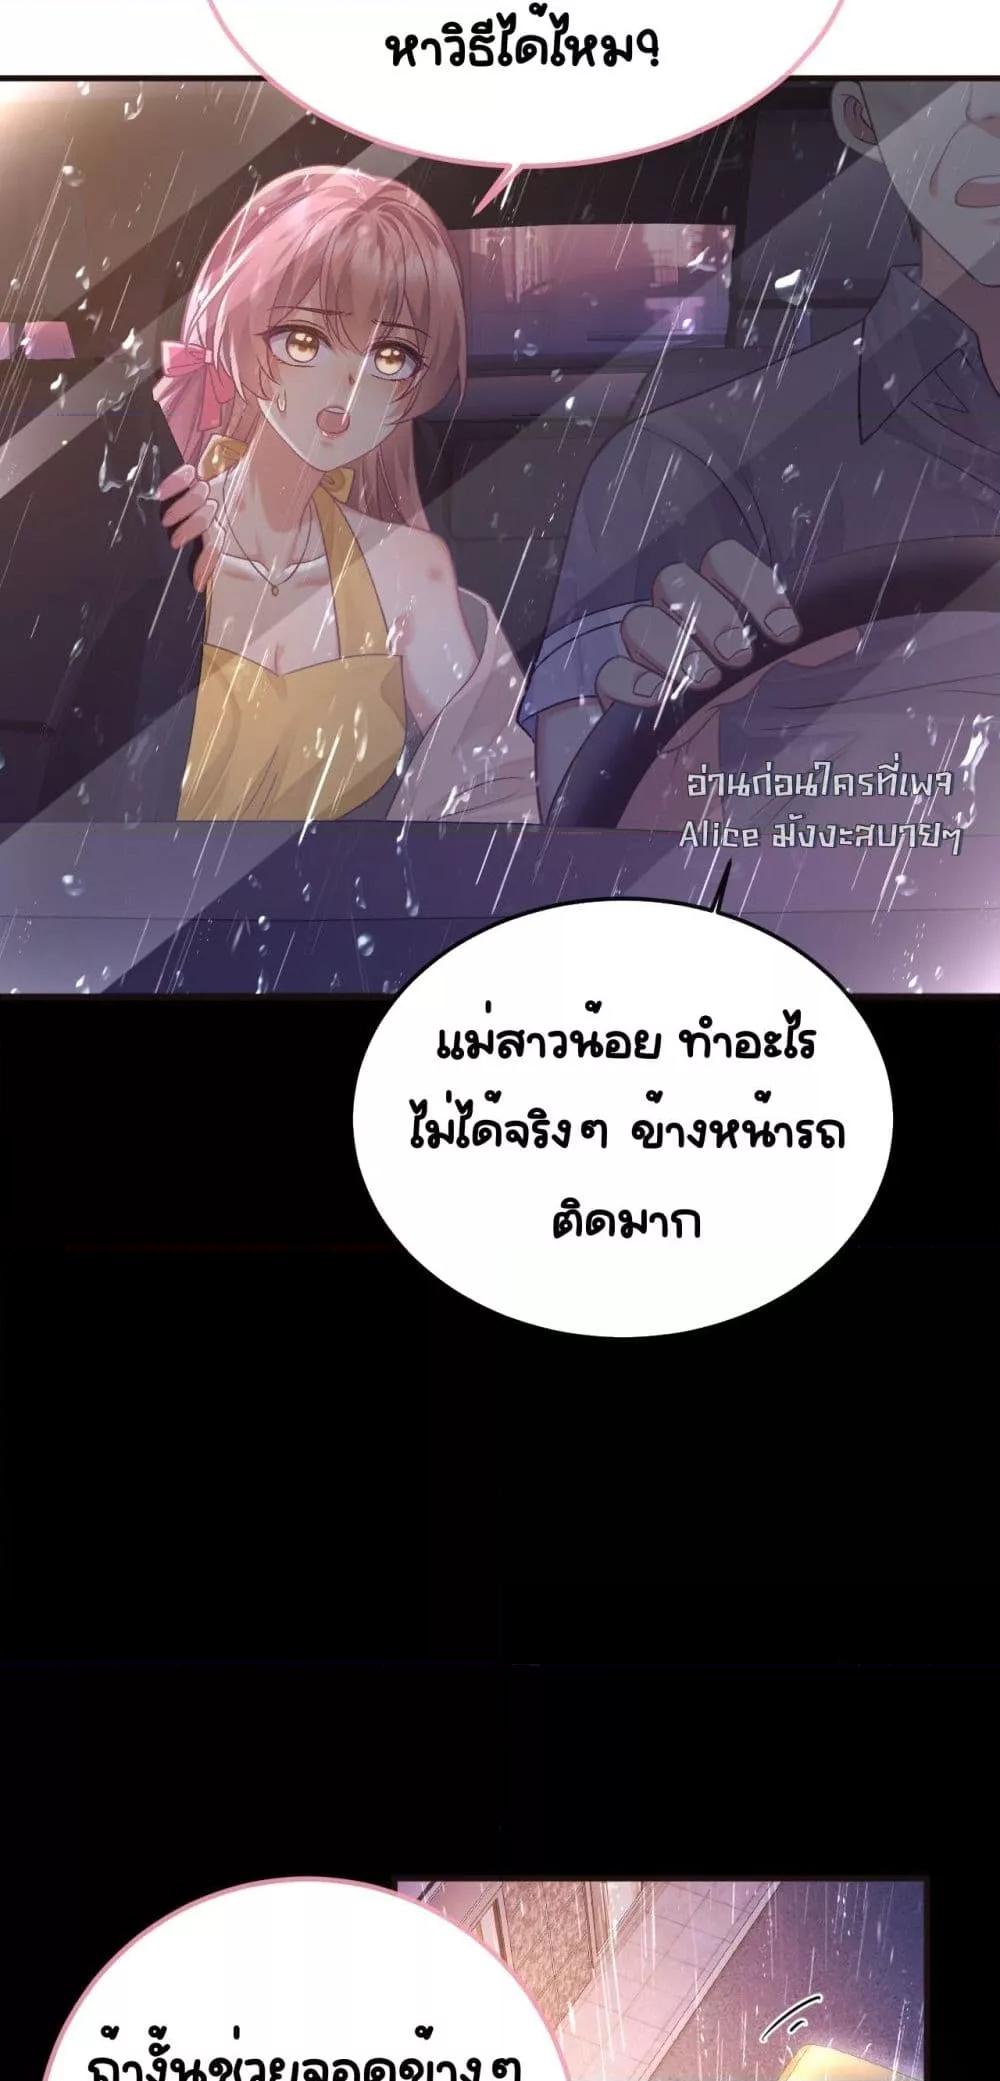 Madam! She Wants to Escape Every Day – มาดาม! ตอนที่ 1 (24)